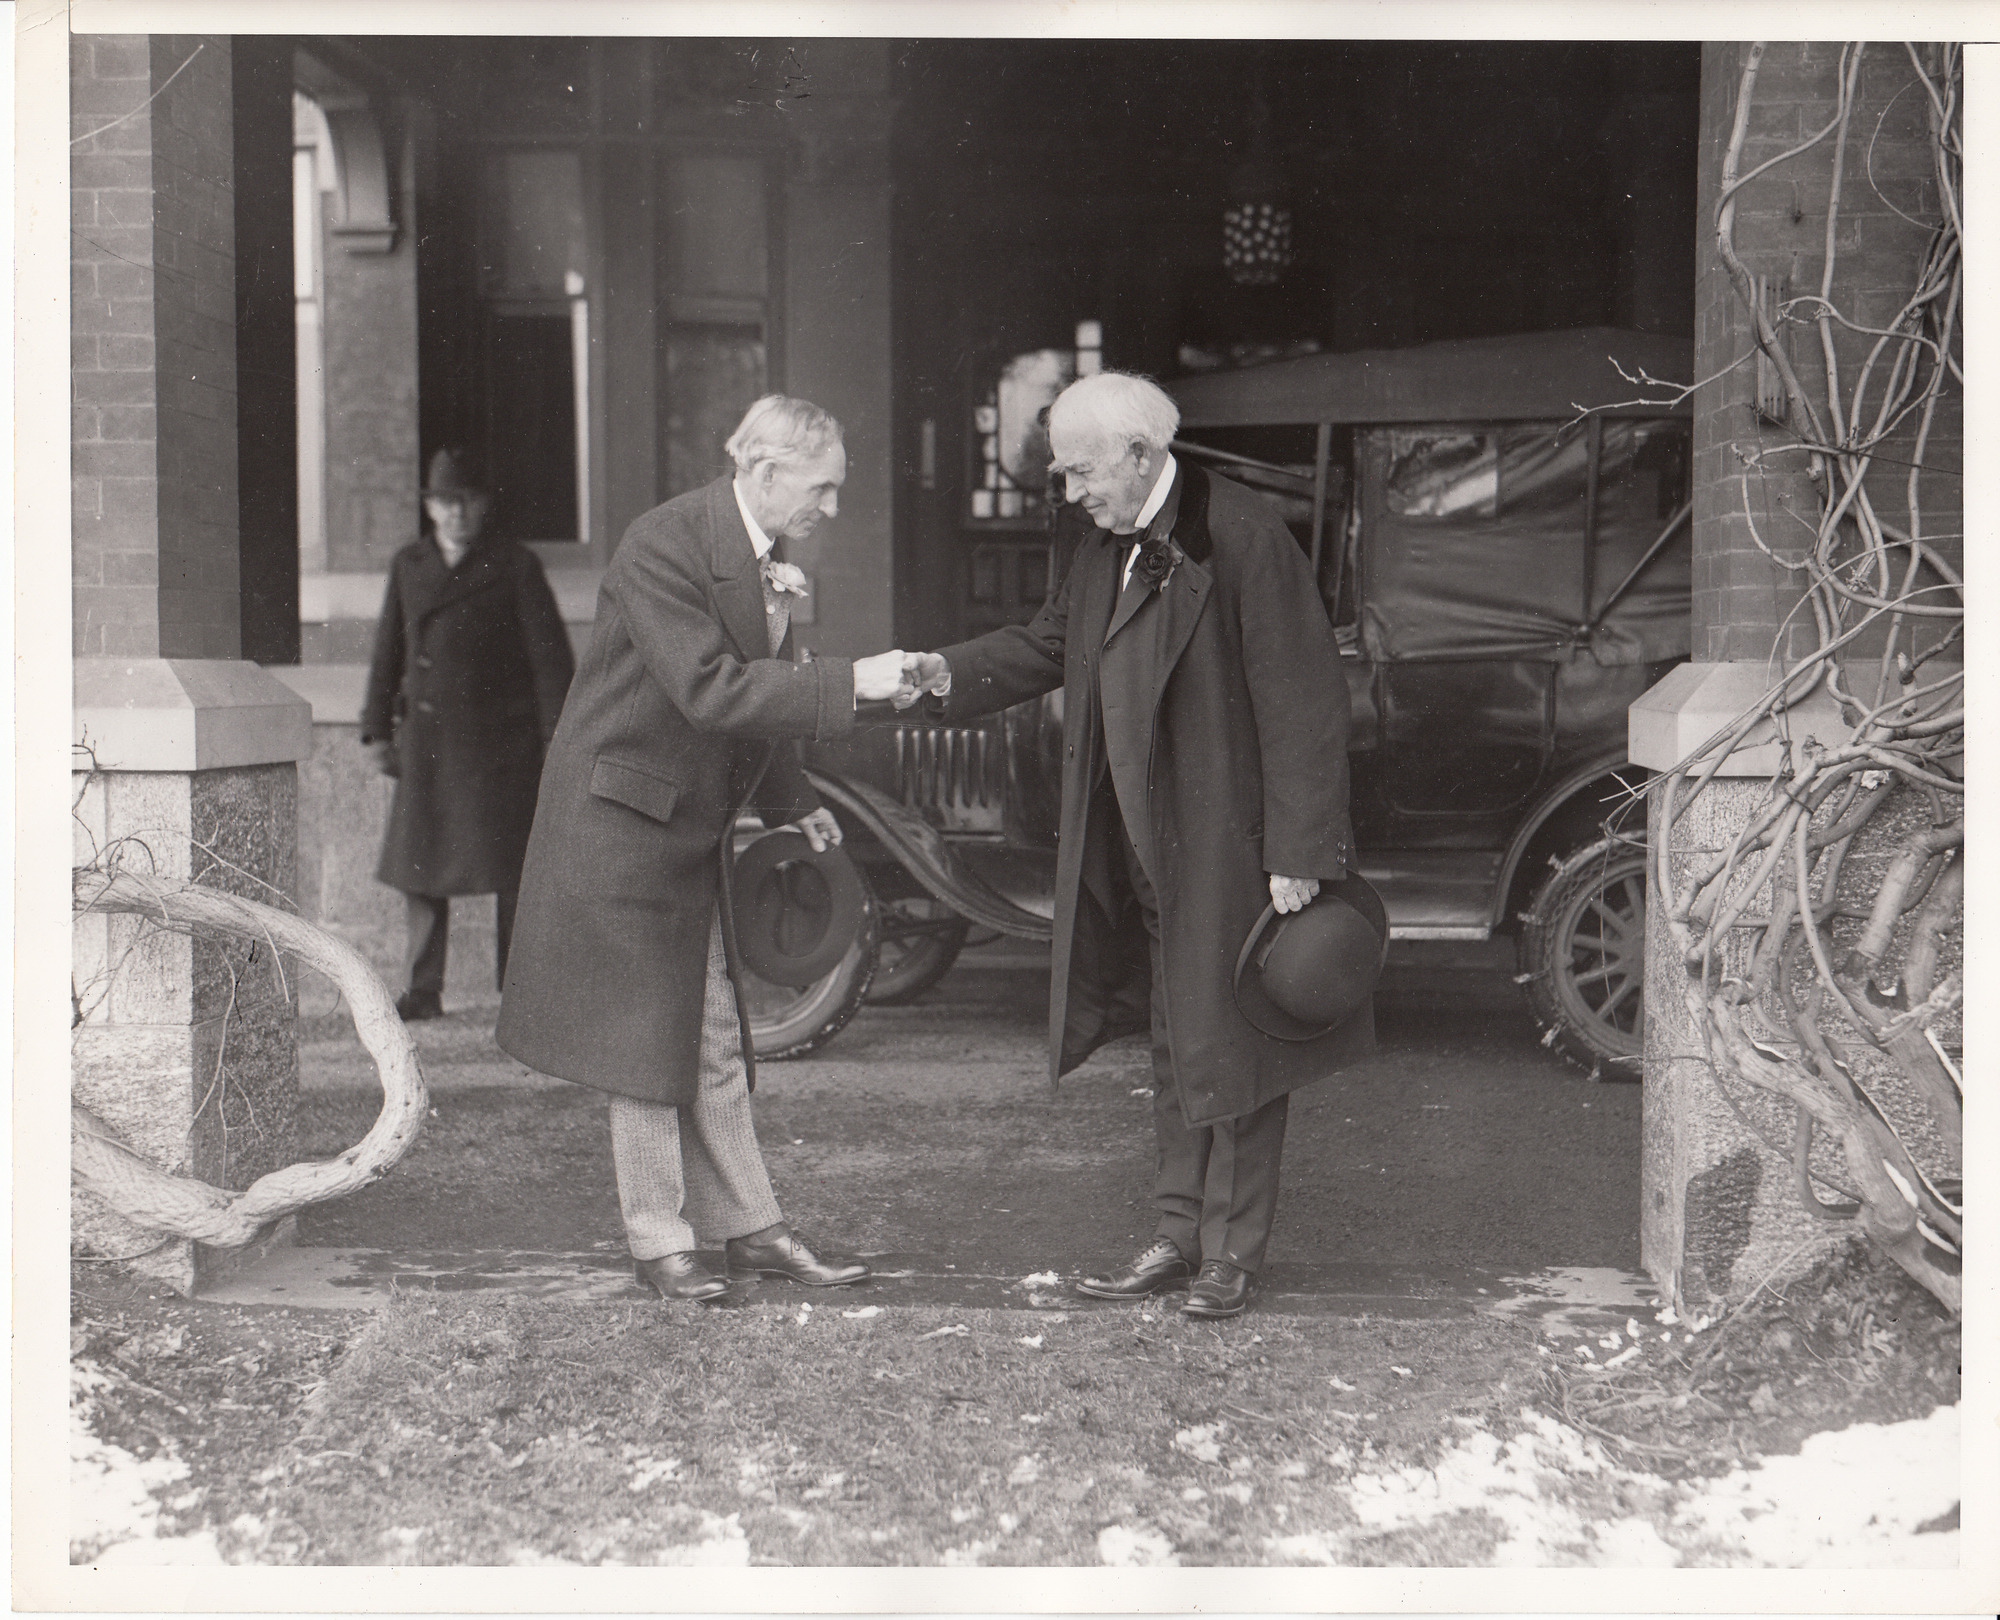 Henry Ford shaking hands with Edison in front of Glenmont on the latter's 80th birthday.